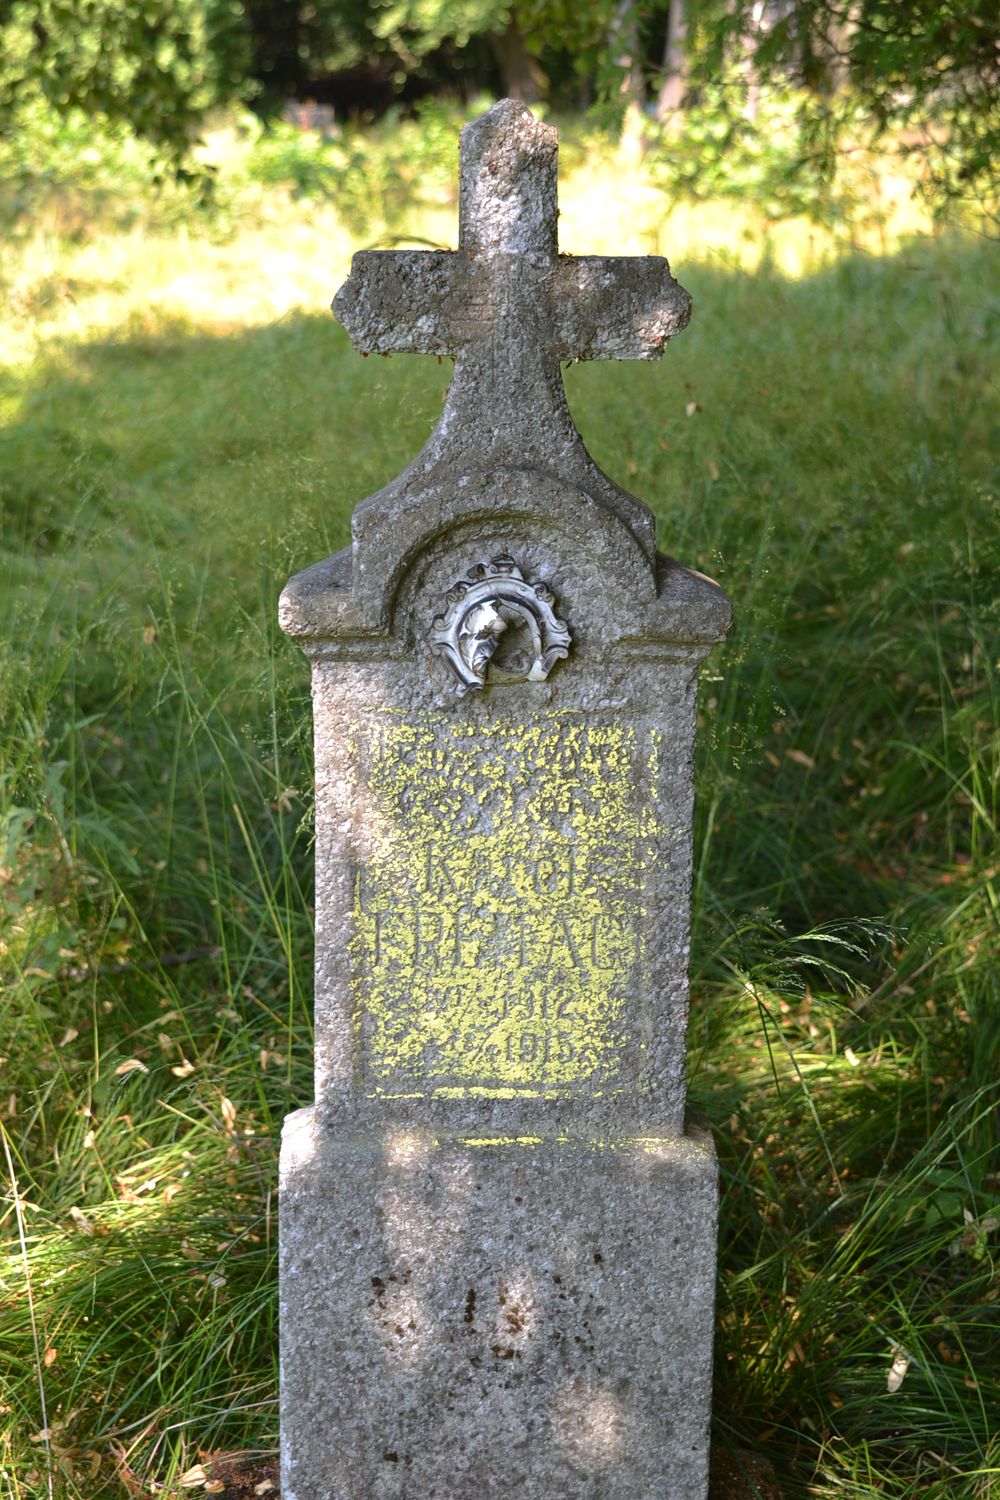 Inscription from the tombstone of Karol Freitag, cemetery in Karviná Mexico, Czech Republic, as of 2022